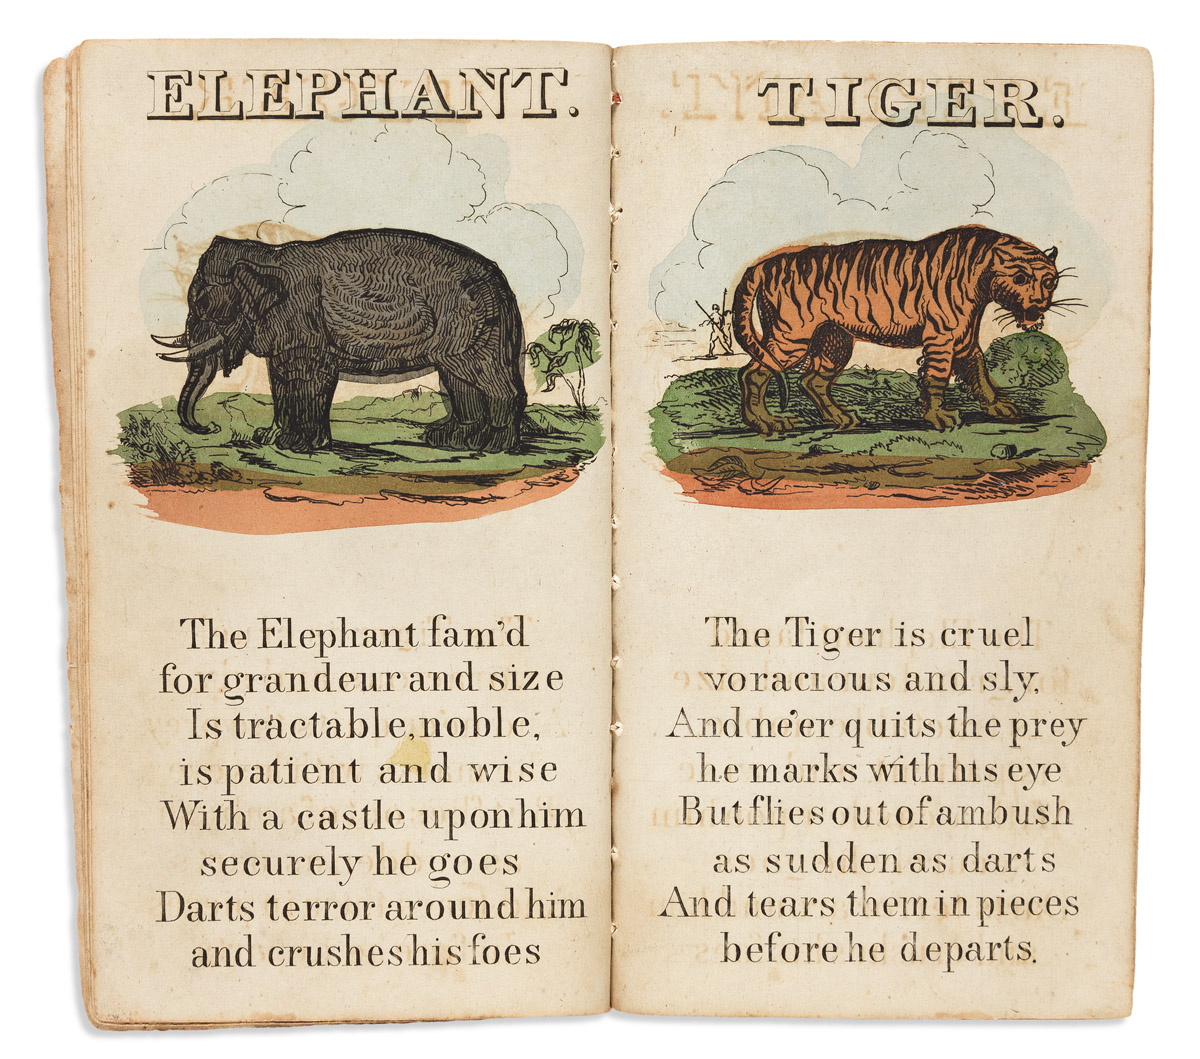 (CHILDRENS BOOKS.) The Cabinet of Nature, or, Animal World Displayed.